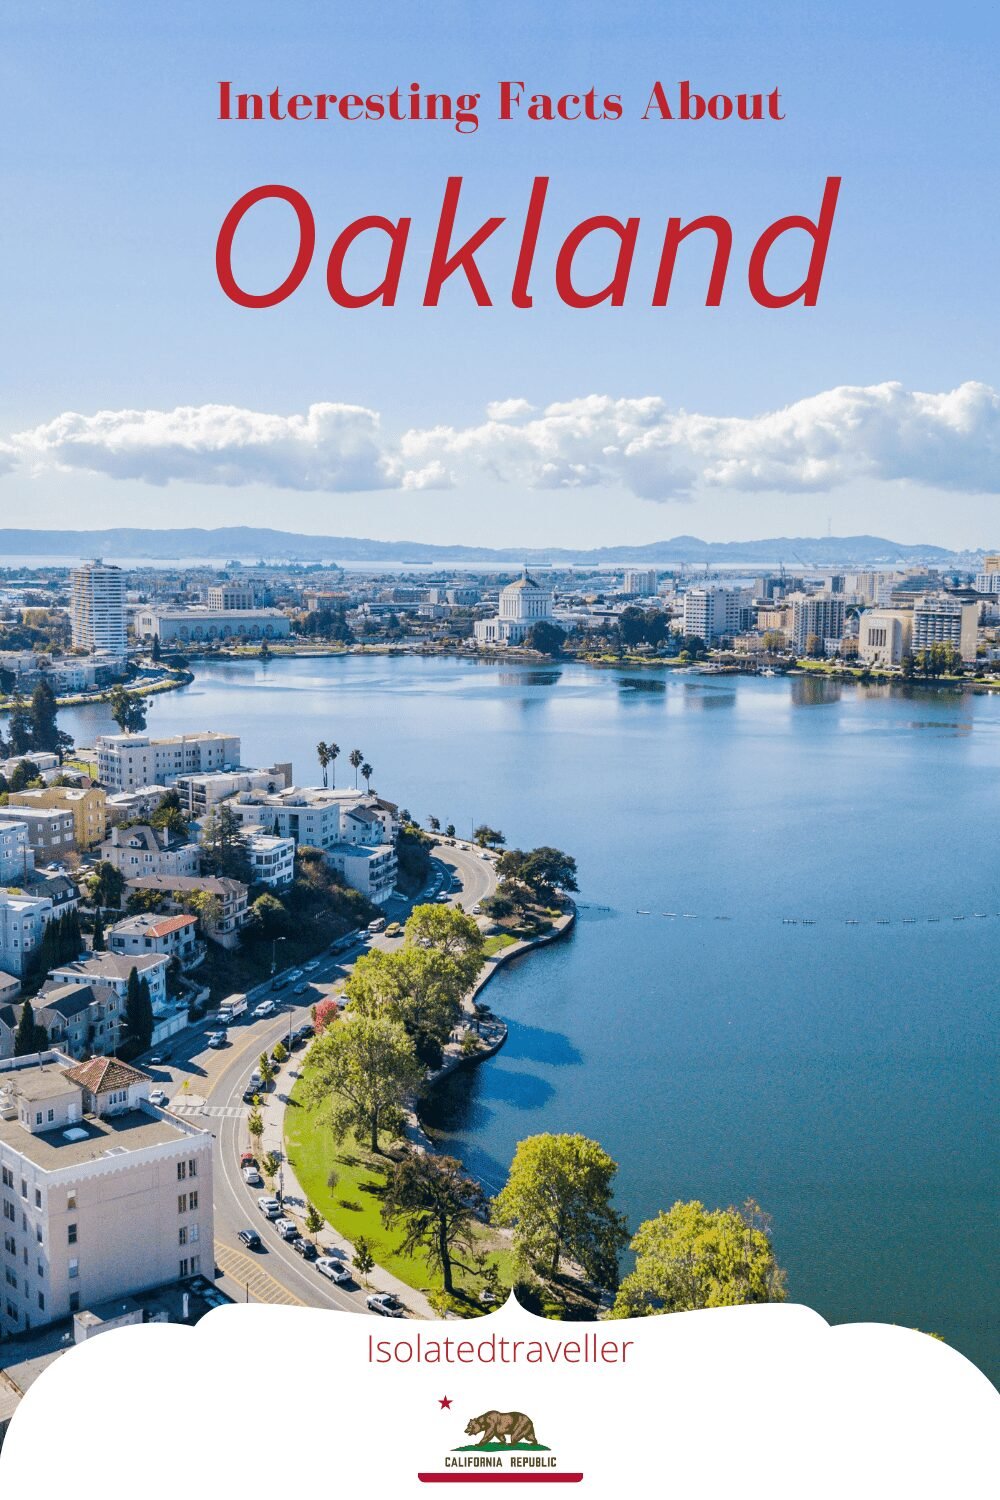 Facts About Oakland